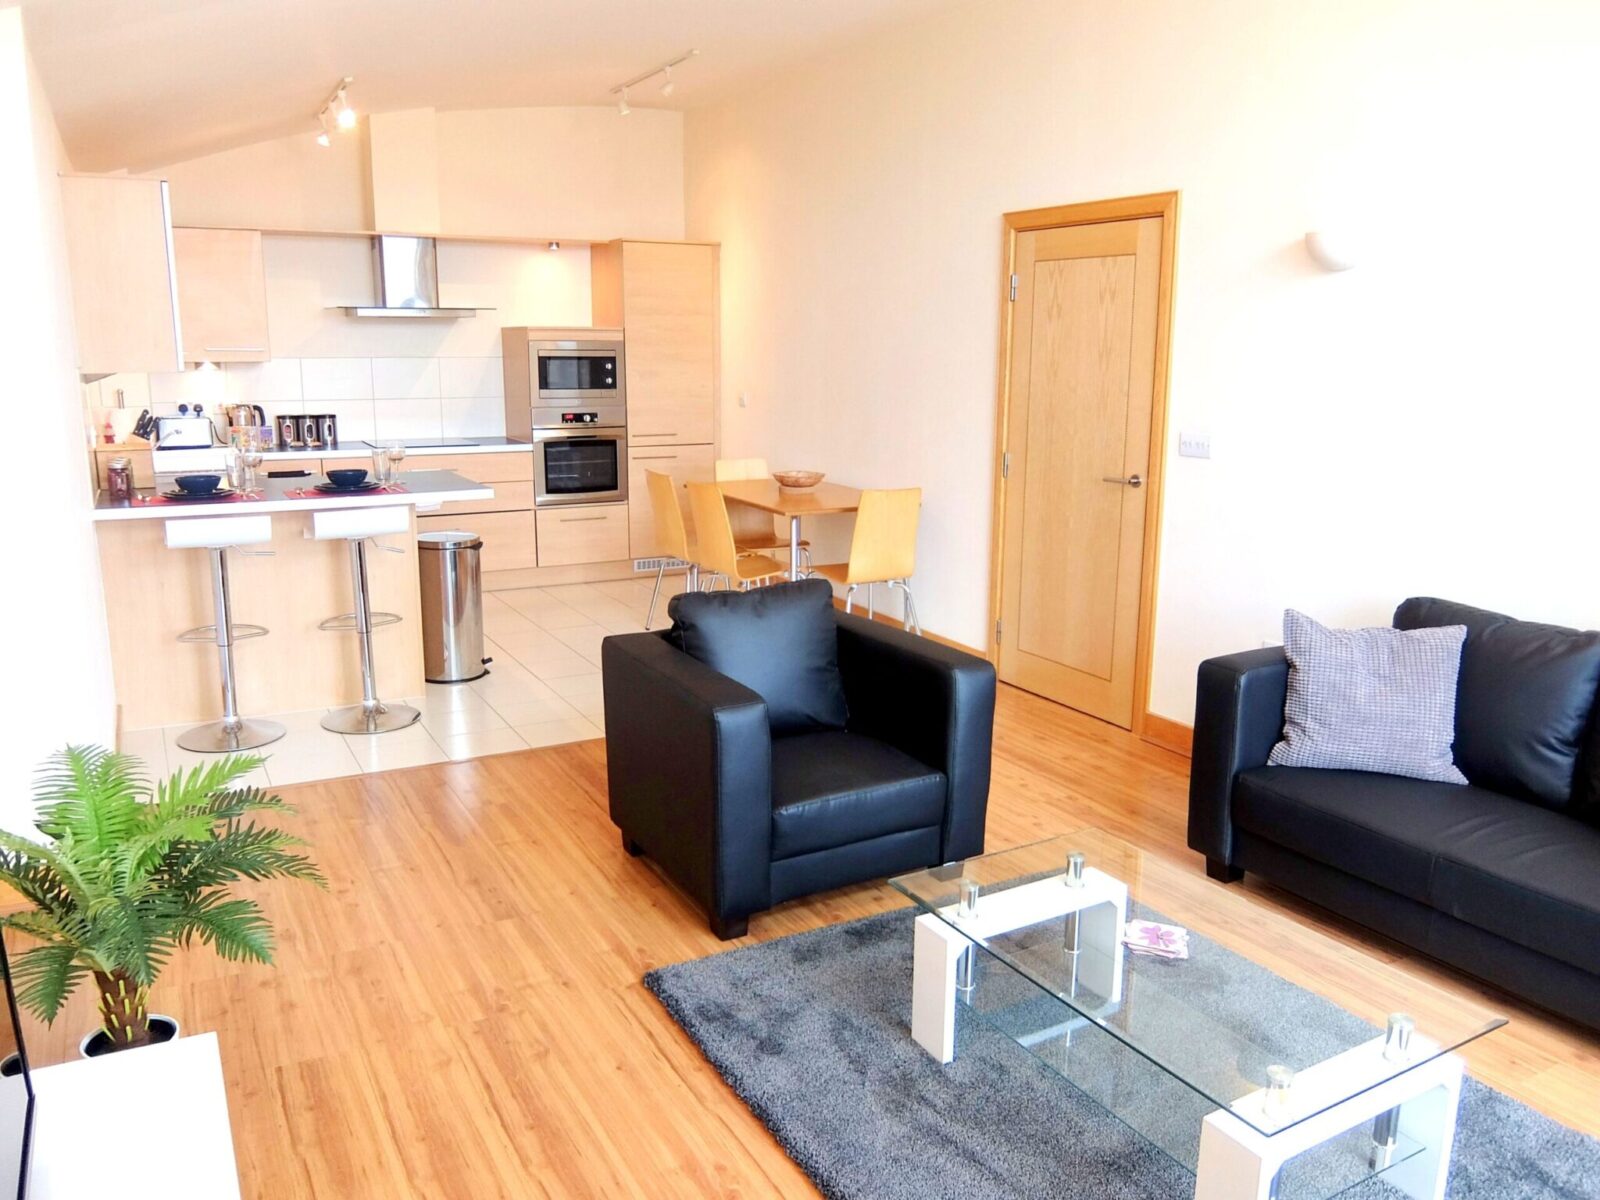 Surrey-Serviced-Accommodation---Hampton-Court-Free-Wifi-DVD-Player-Parking-Apartment---Urban-Stay